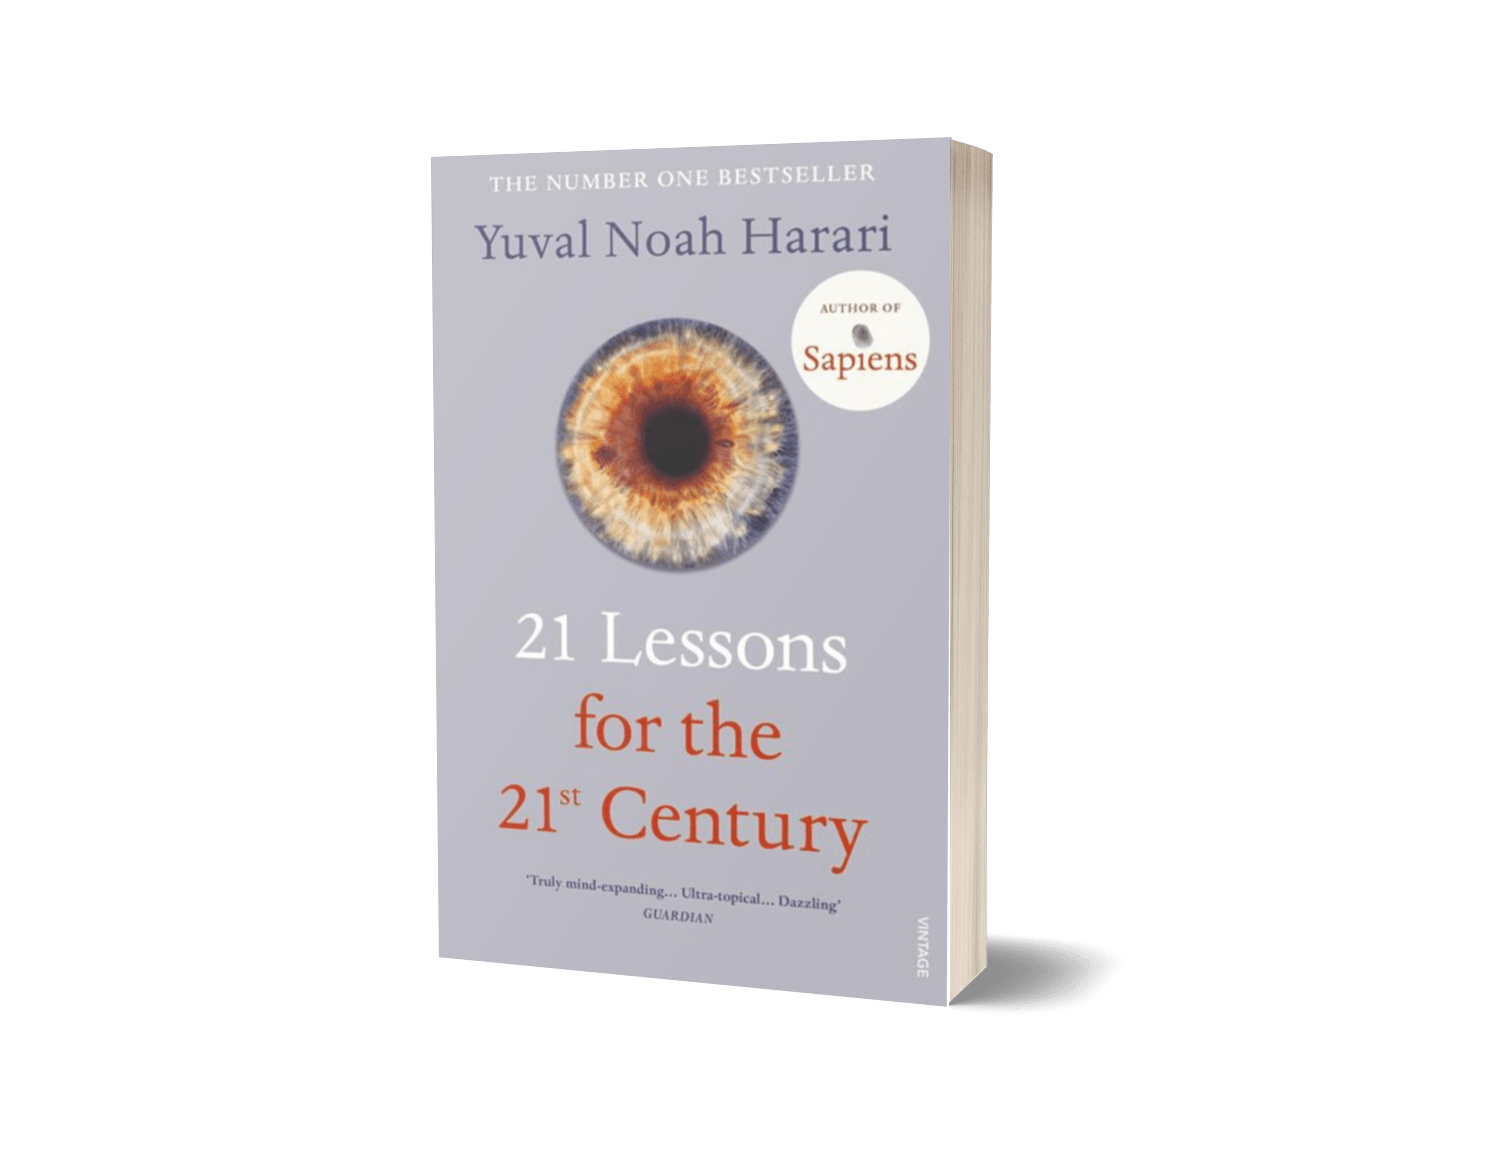 21 Lessons For The 21st Century | Yuval Noah Harari